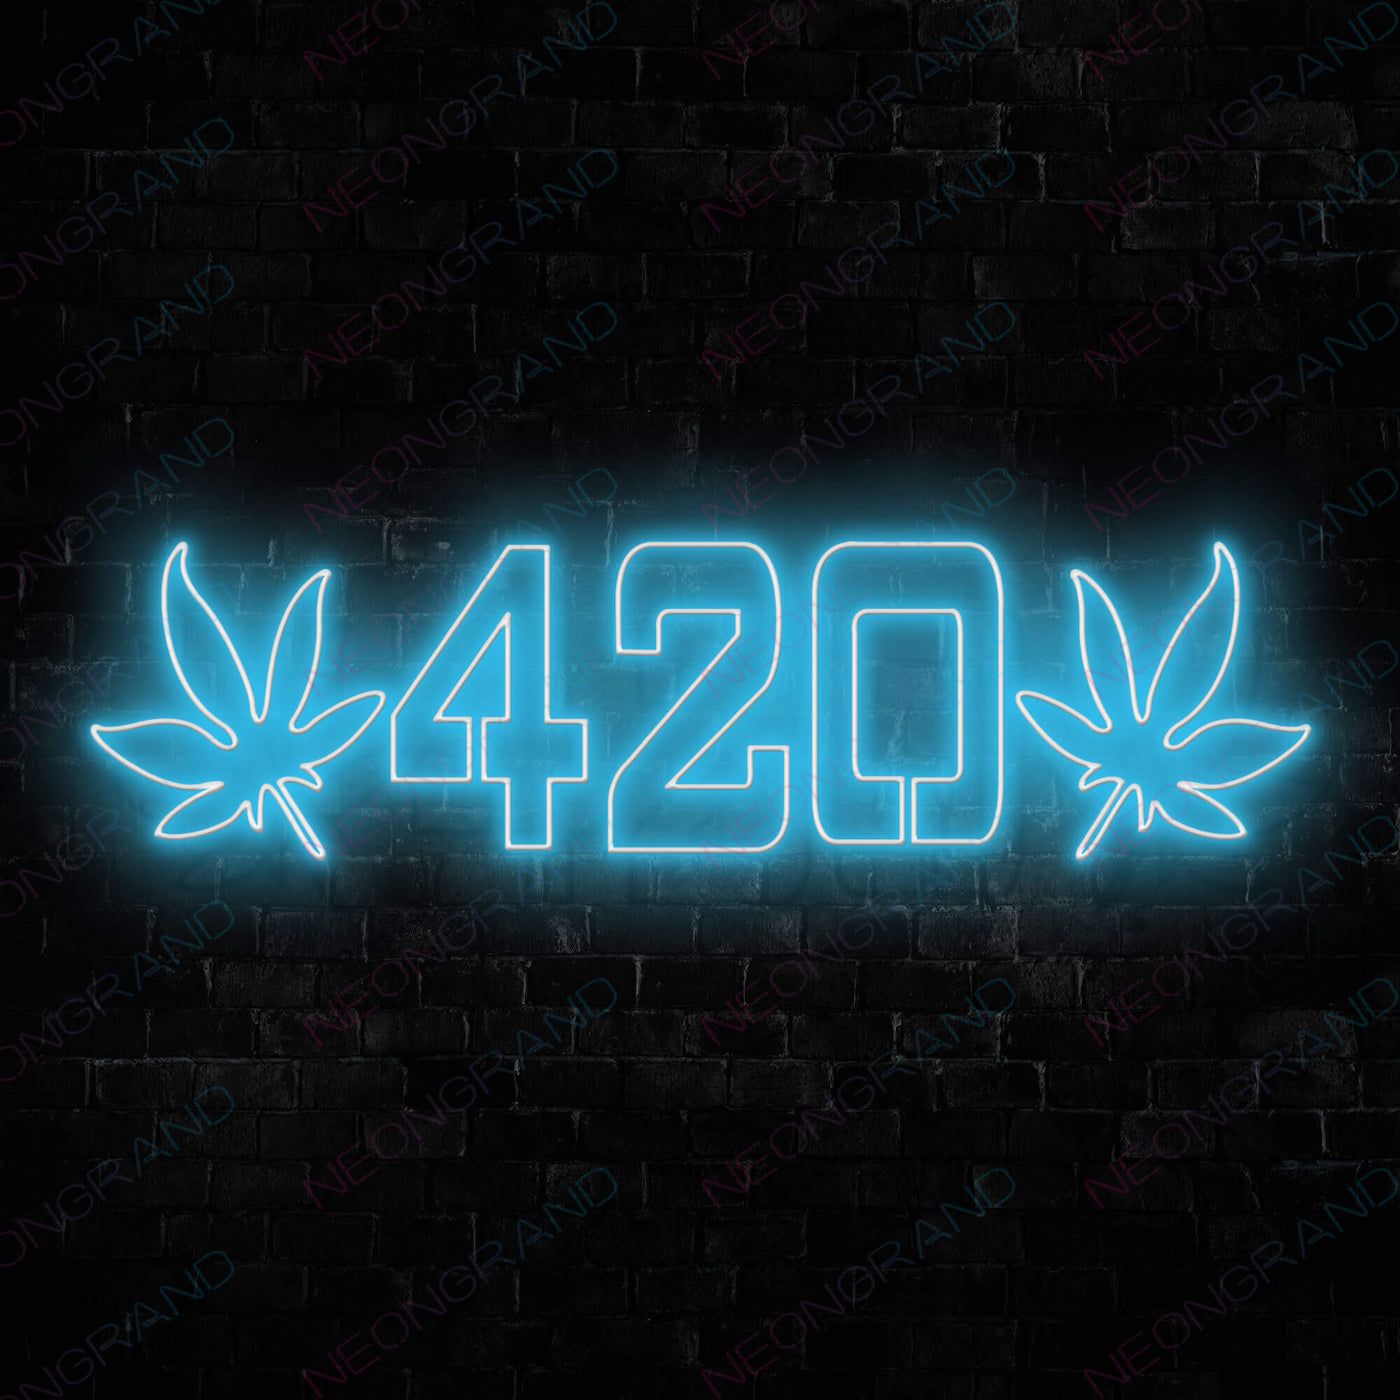 Cannabis 420 Weed Neon Sign Led Light light blue